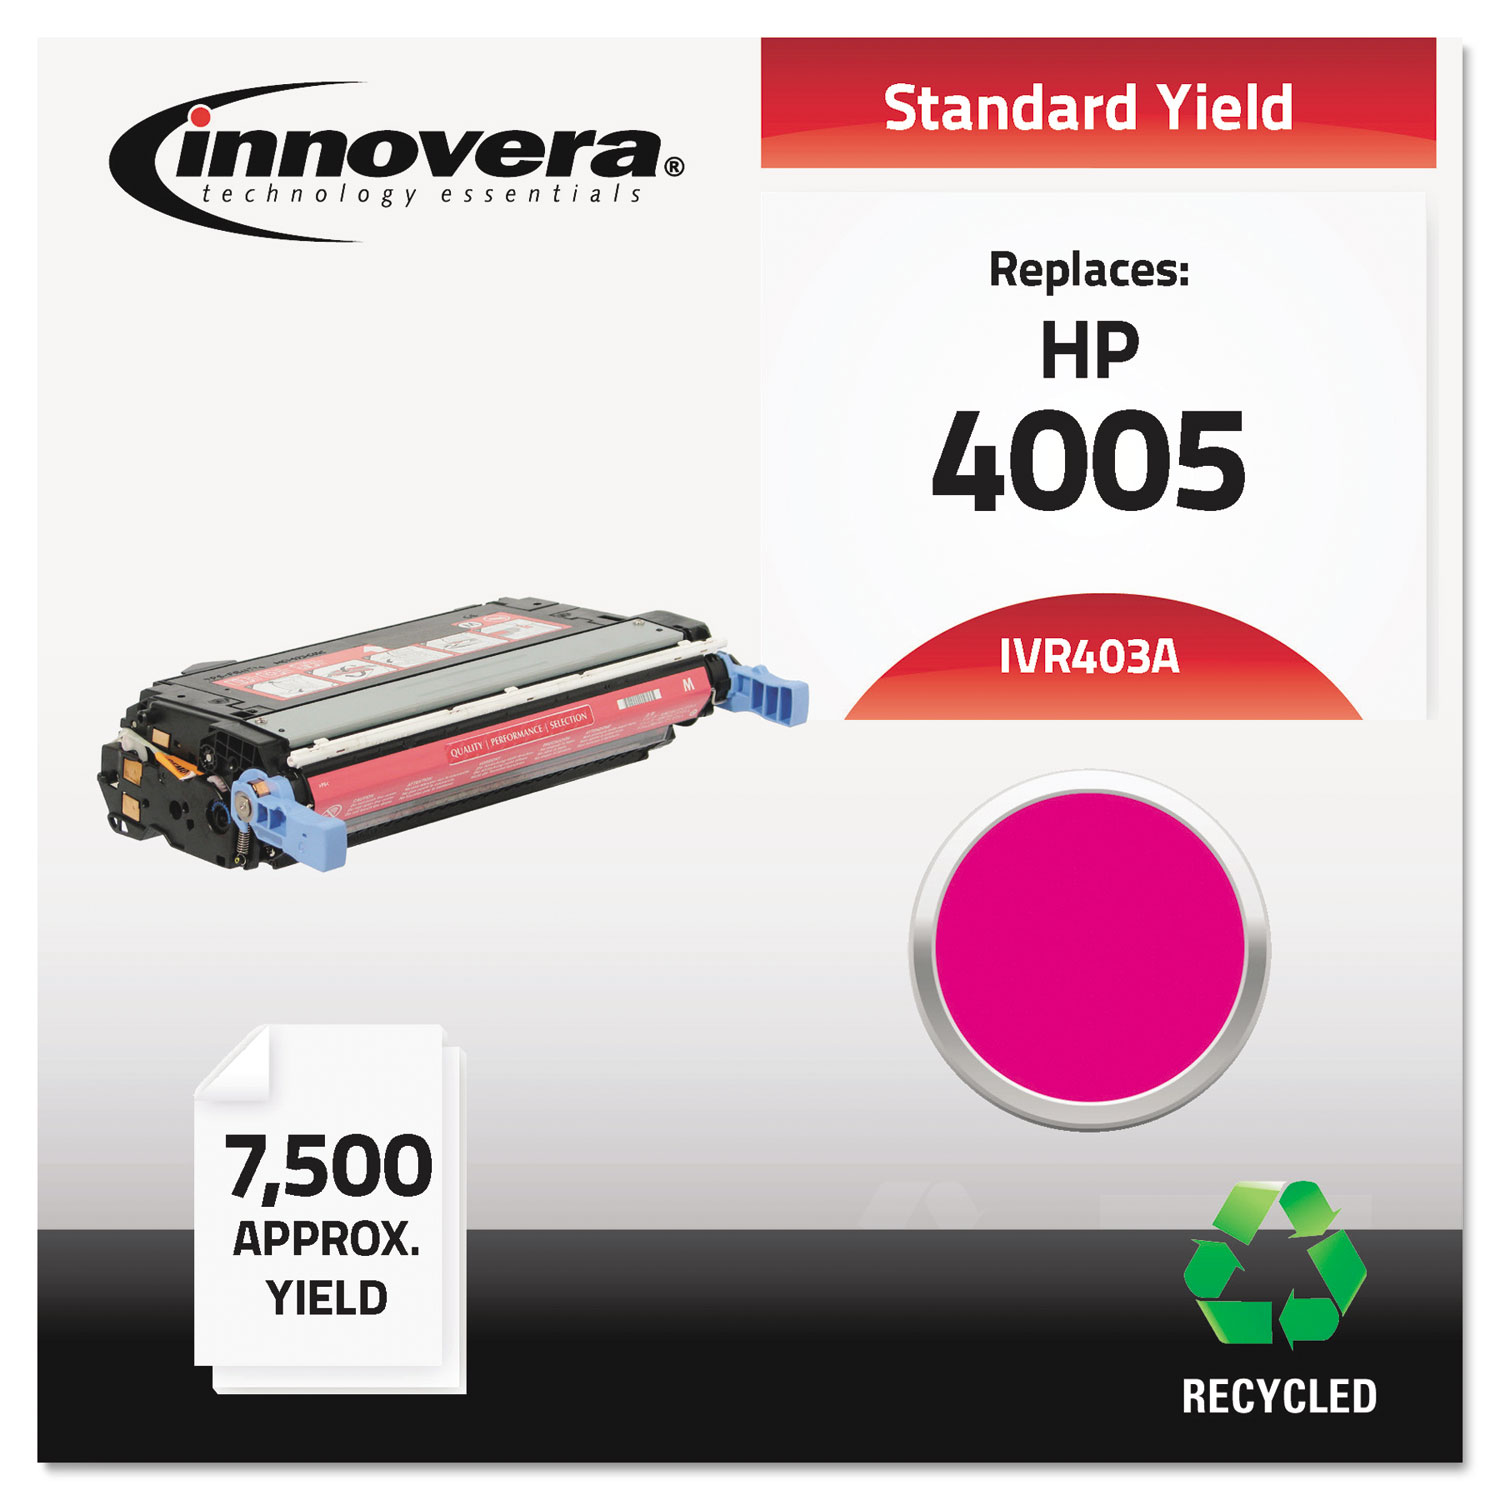  Innovera IVR403A Remanufactured CB403A (642A) Toner, 7500 Page-Yield, Magenta (IVR403A) 